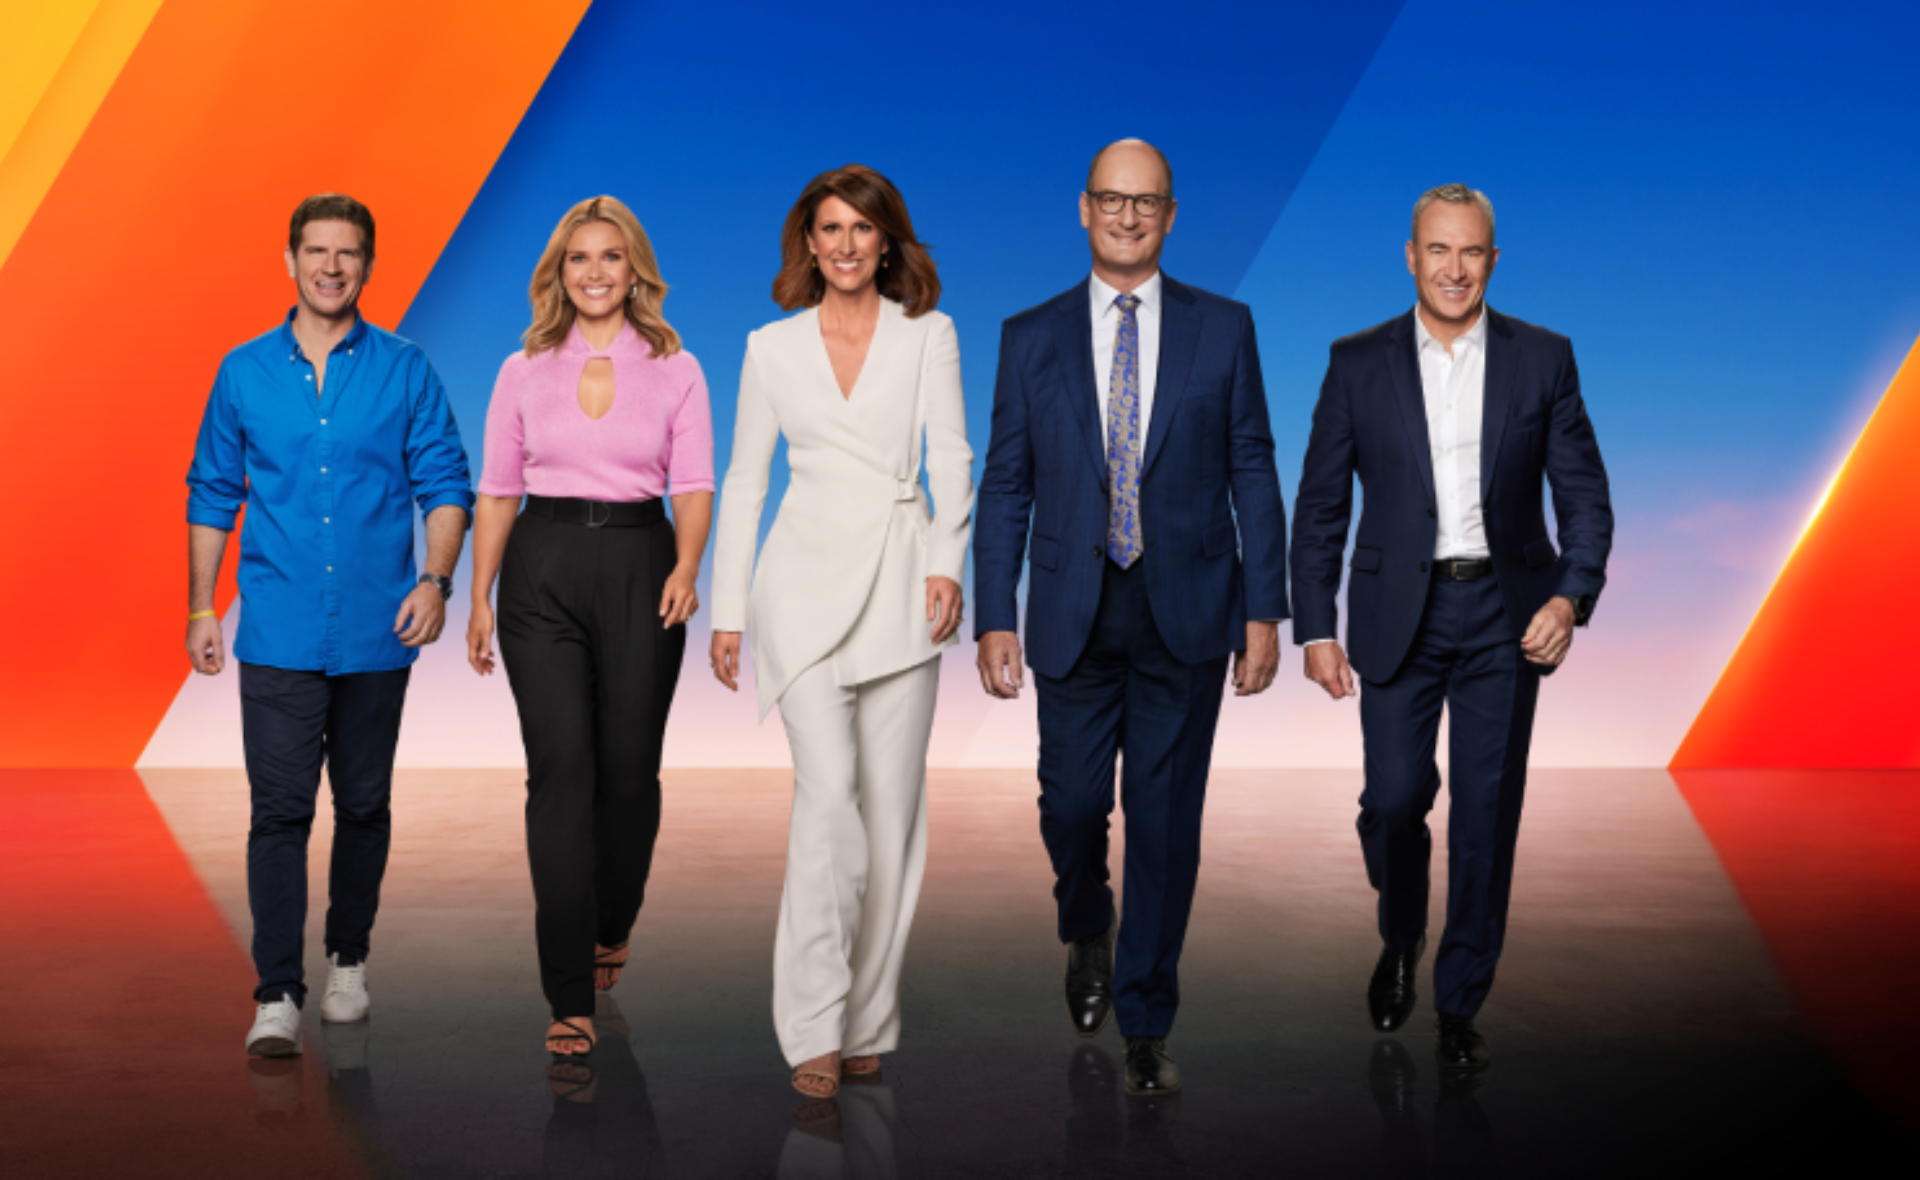 Sunrise versus Today: Stars “will get the boot” if ratings continue to drop?